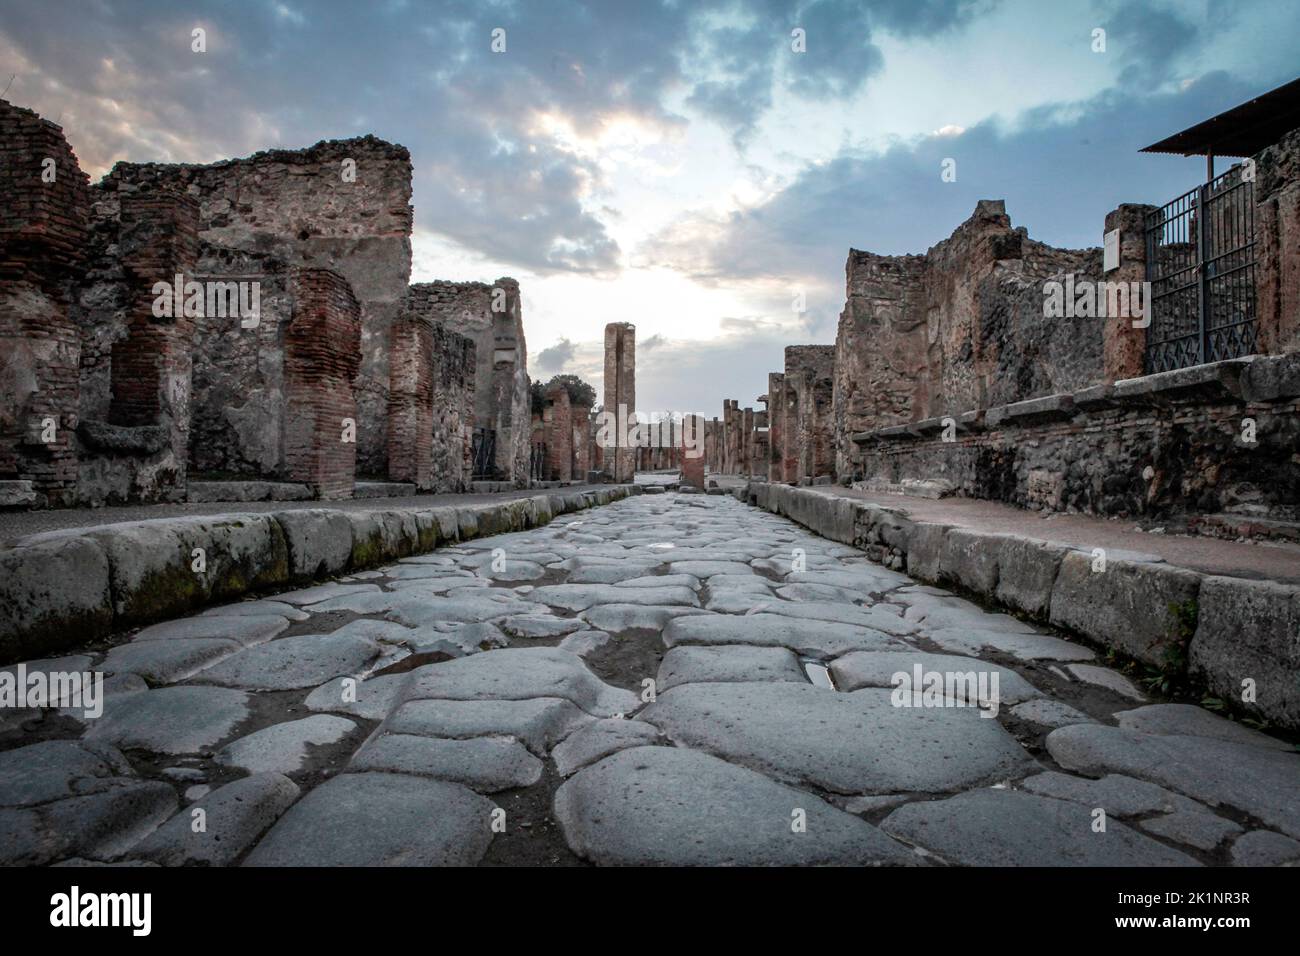 the archaeological park / town of Pompeii, a UNESCO World Heritage Site, Naples, Italy Stock Photo